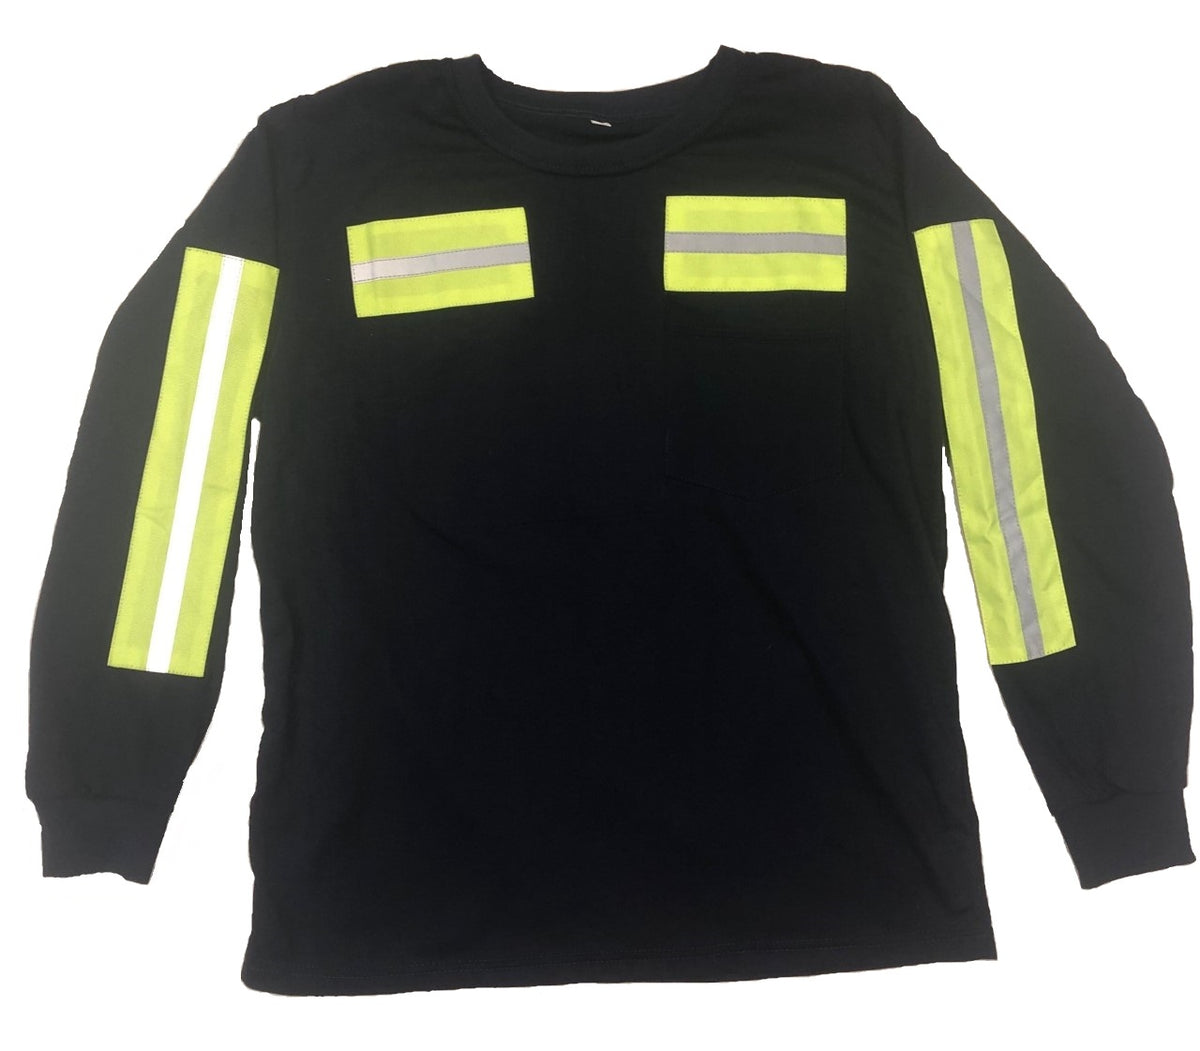 Low Pro Enhanced Visibility Reflective Long Sleeve T-Shirt, Navy w/Lim